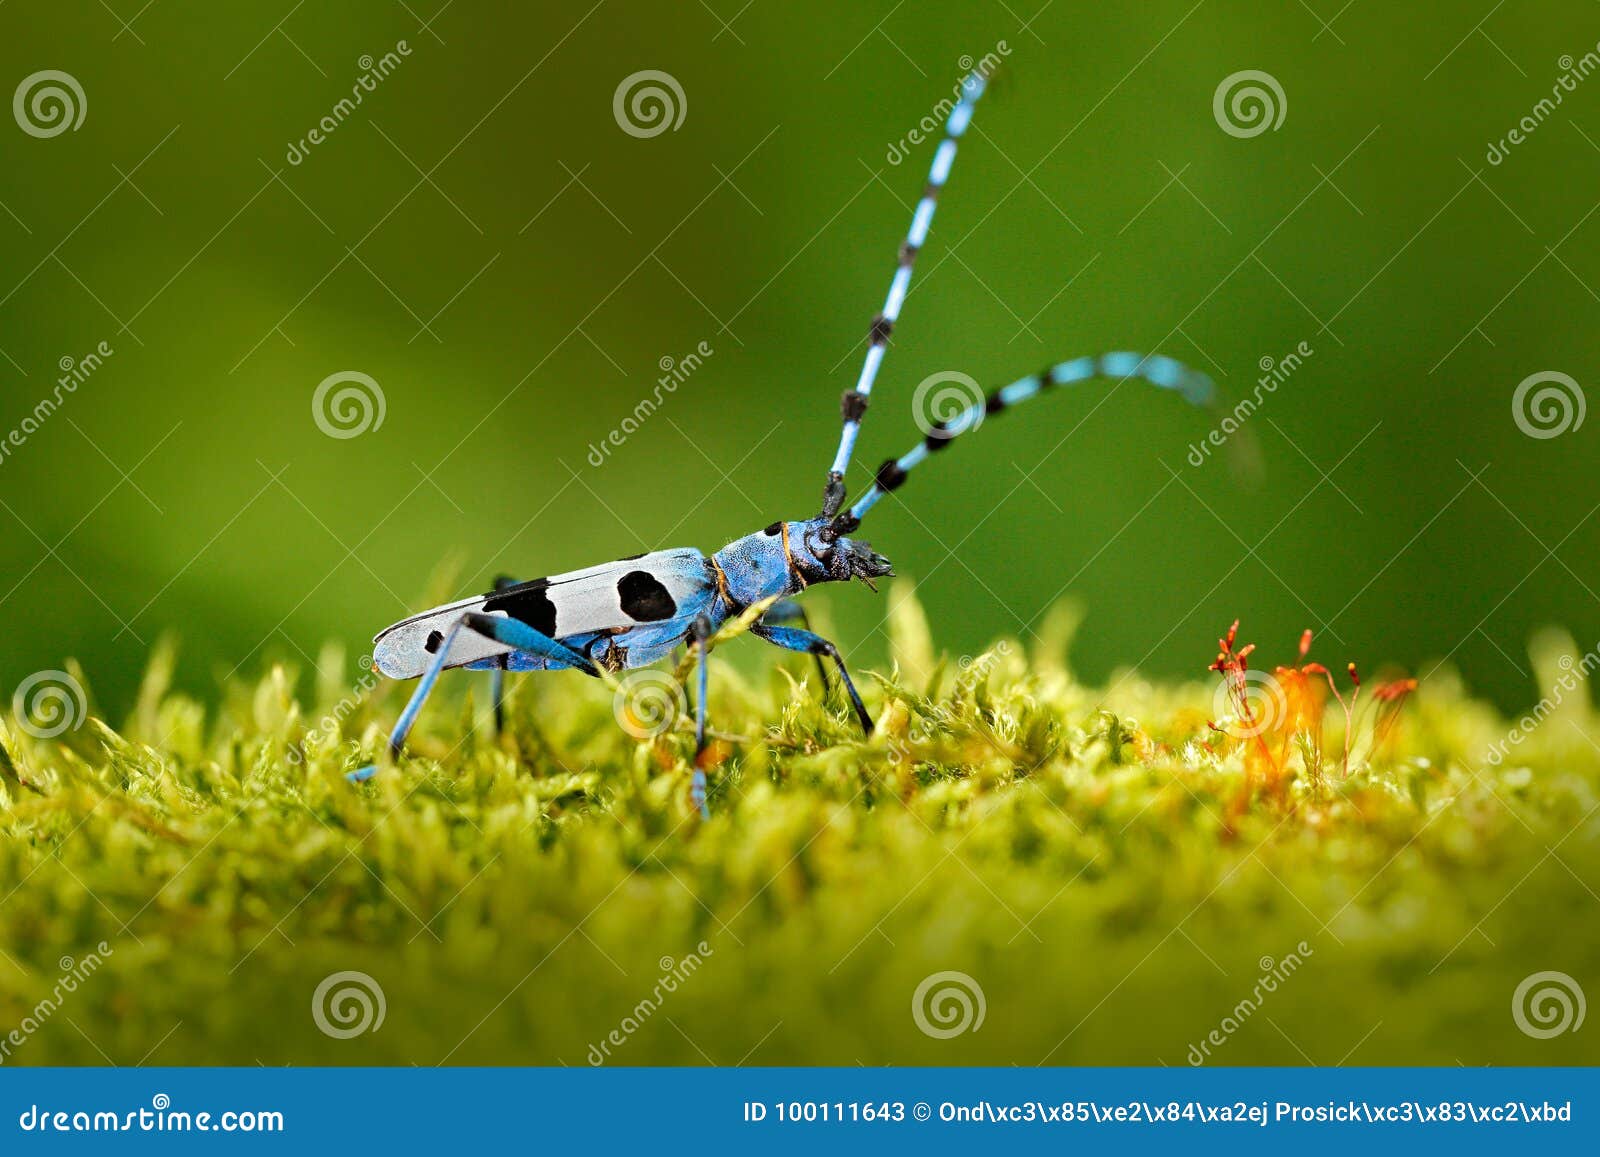 blue insect in forest. beautiful blue incest with long feelers, rosalia longicorn, rosalia alpina, in nature green forest habitat,